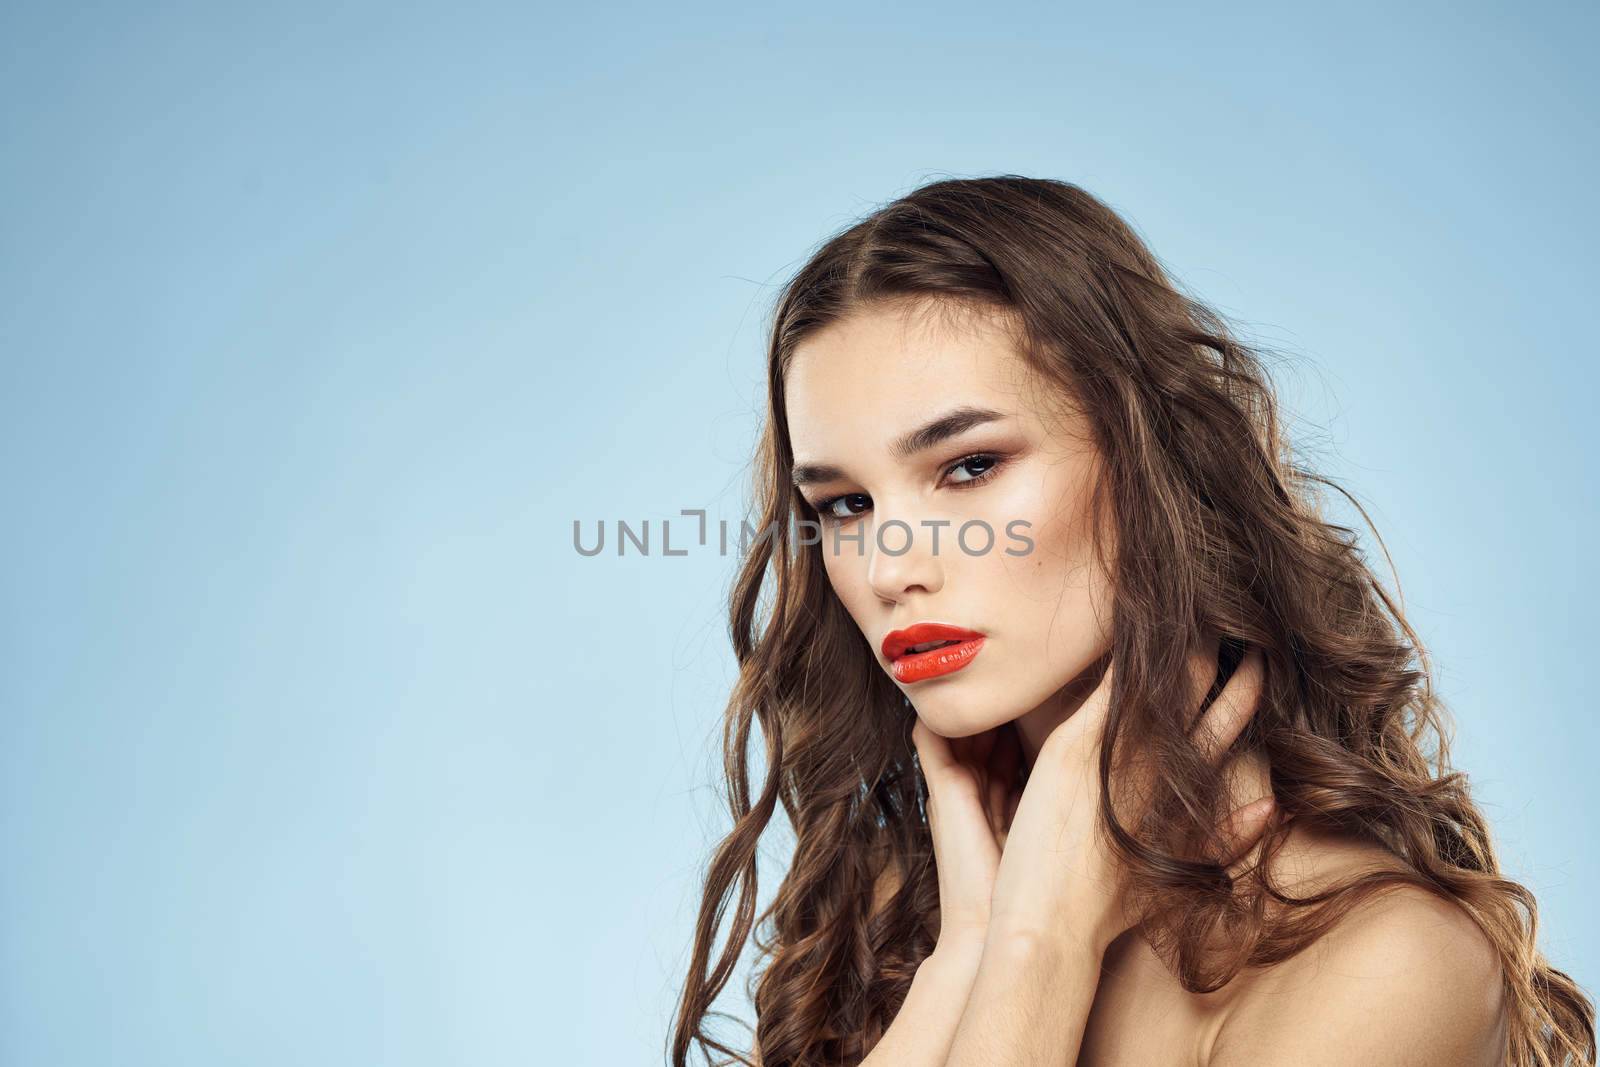 Beautiful woman naked shoulders hairstyle care bright makeup blue background. High quality photo